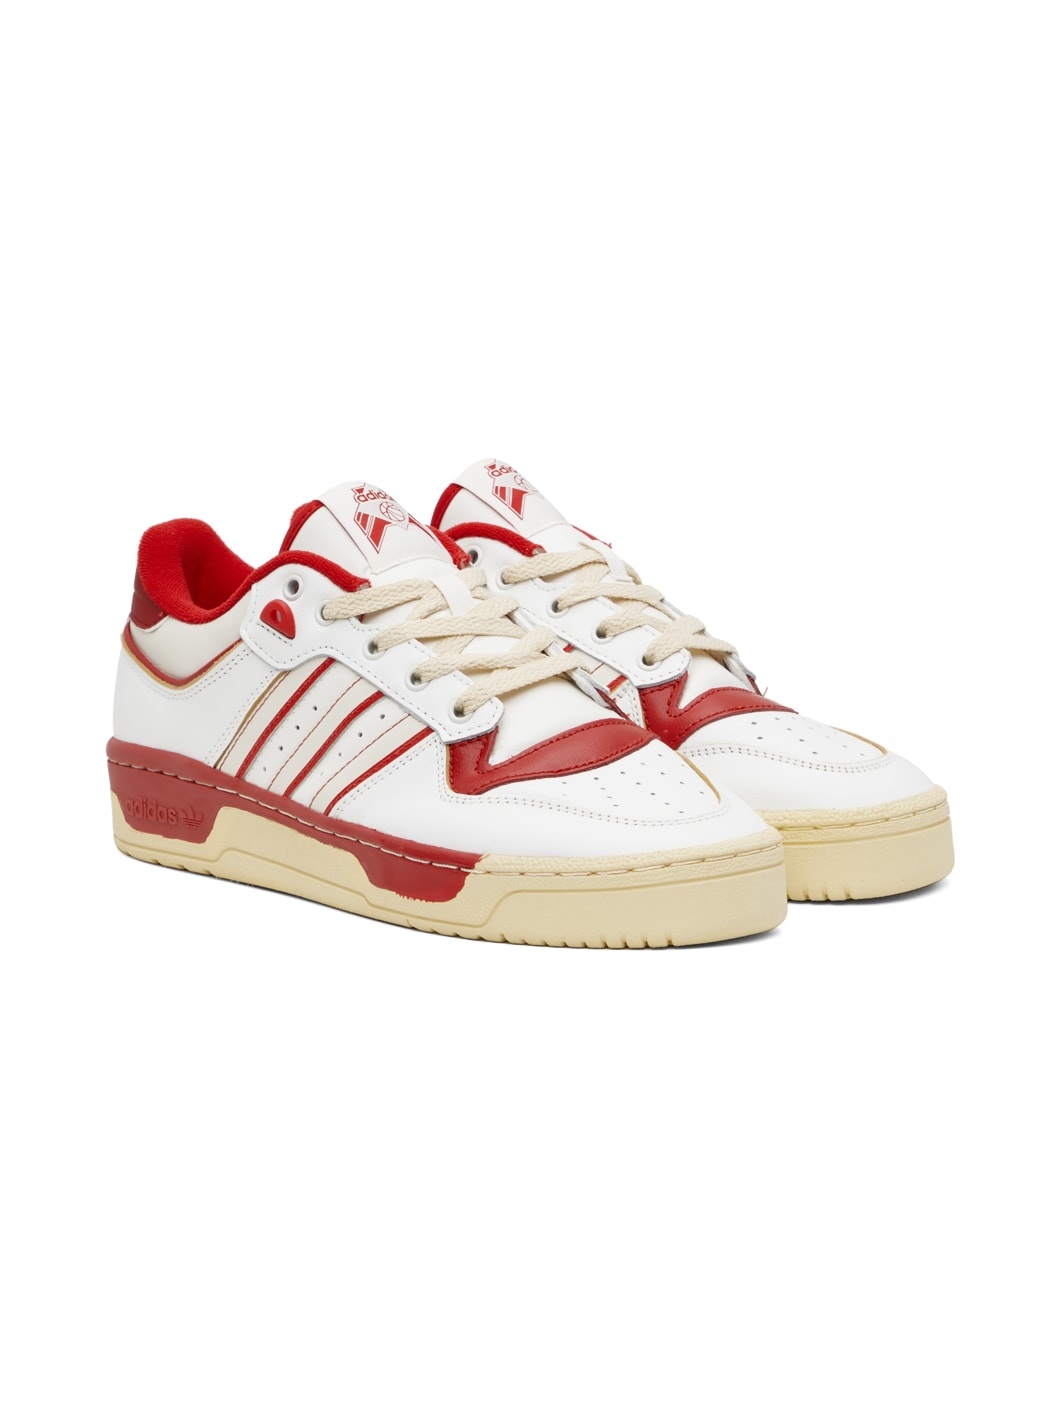 White & Red Rivalry Low 86 Sneakers - 4